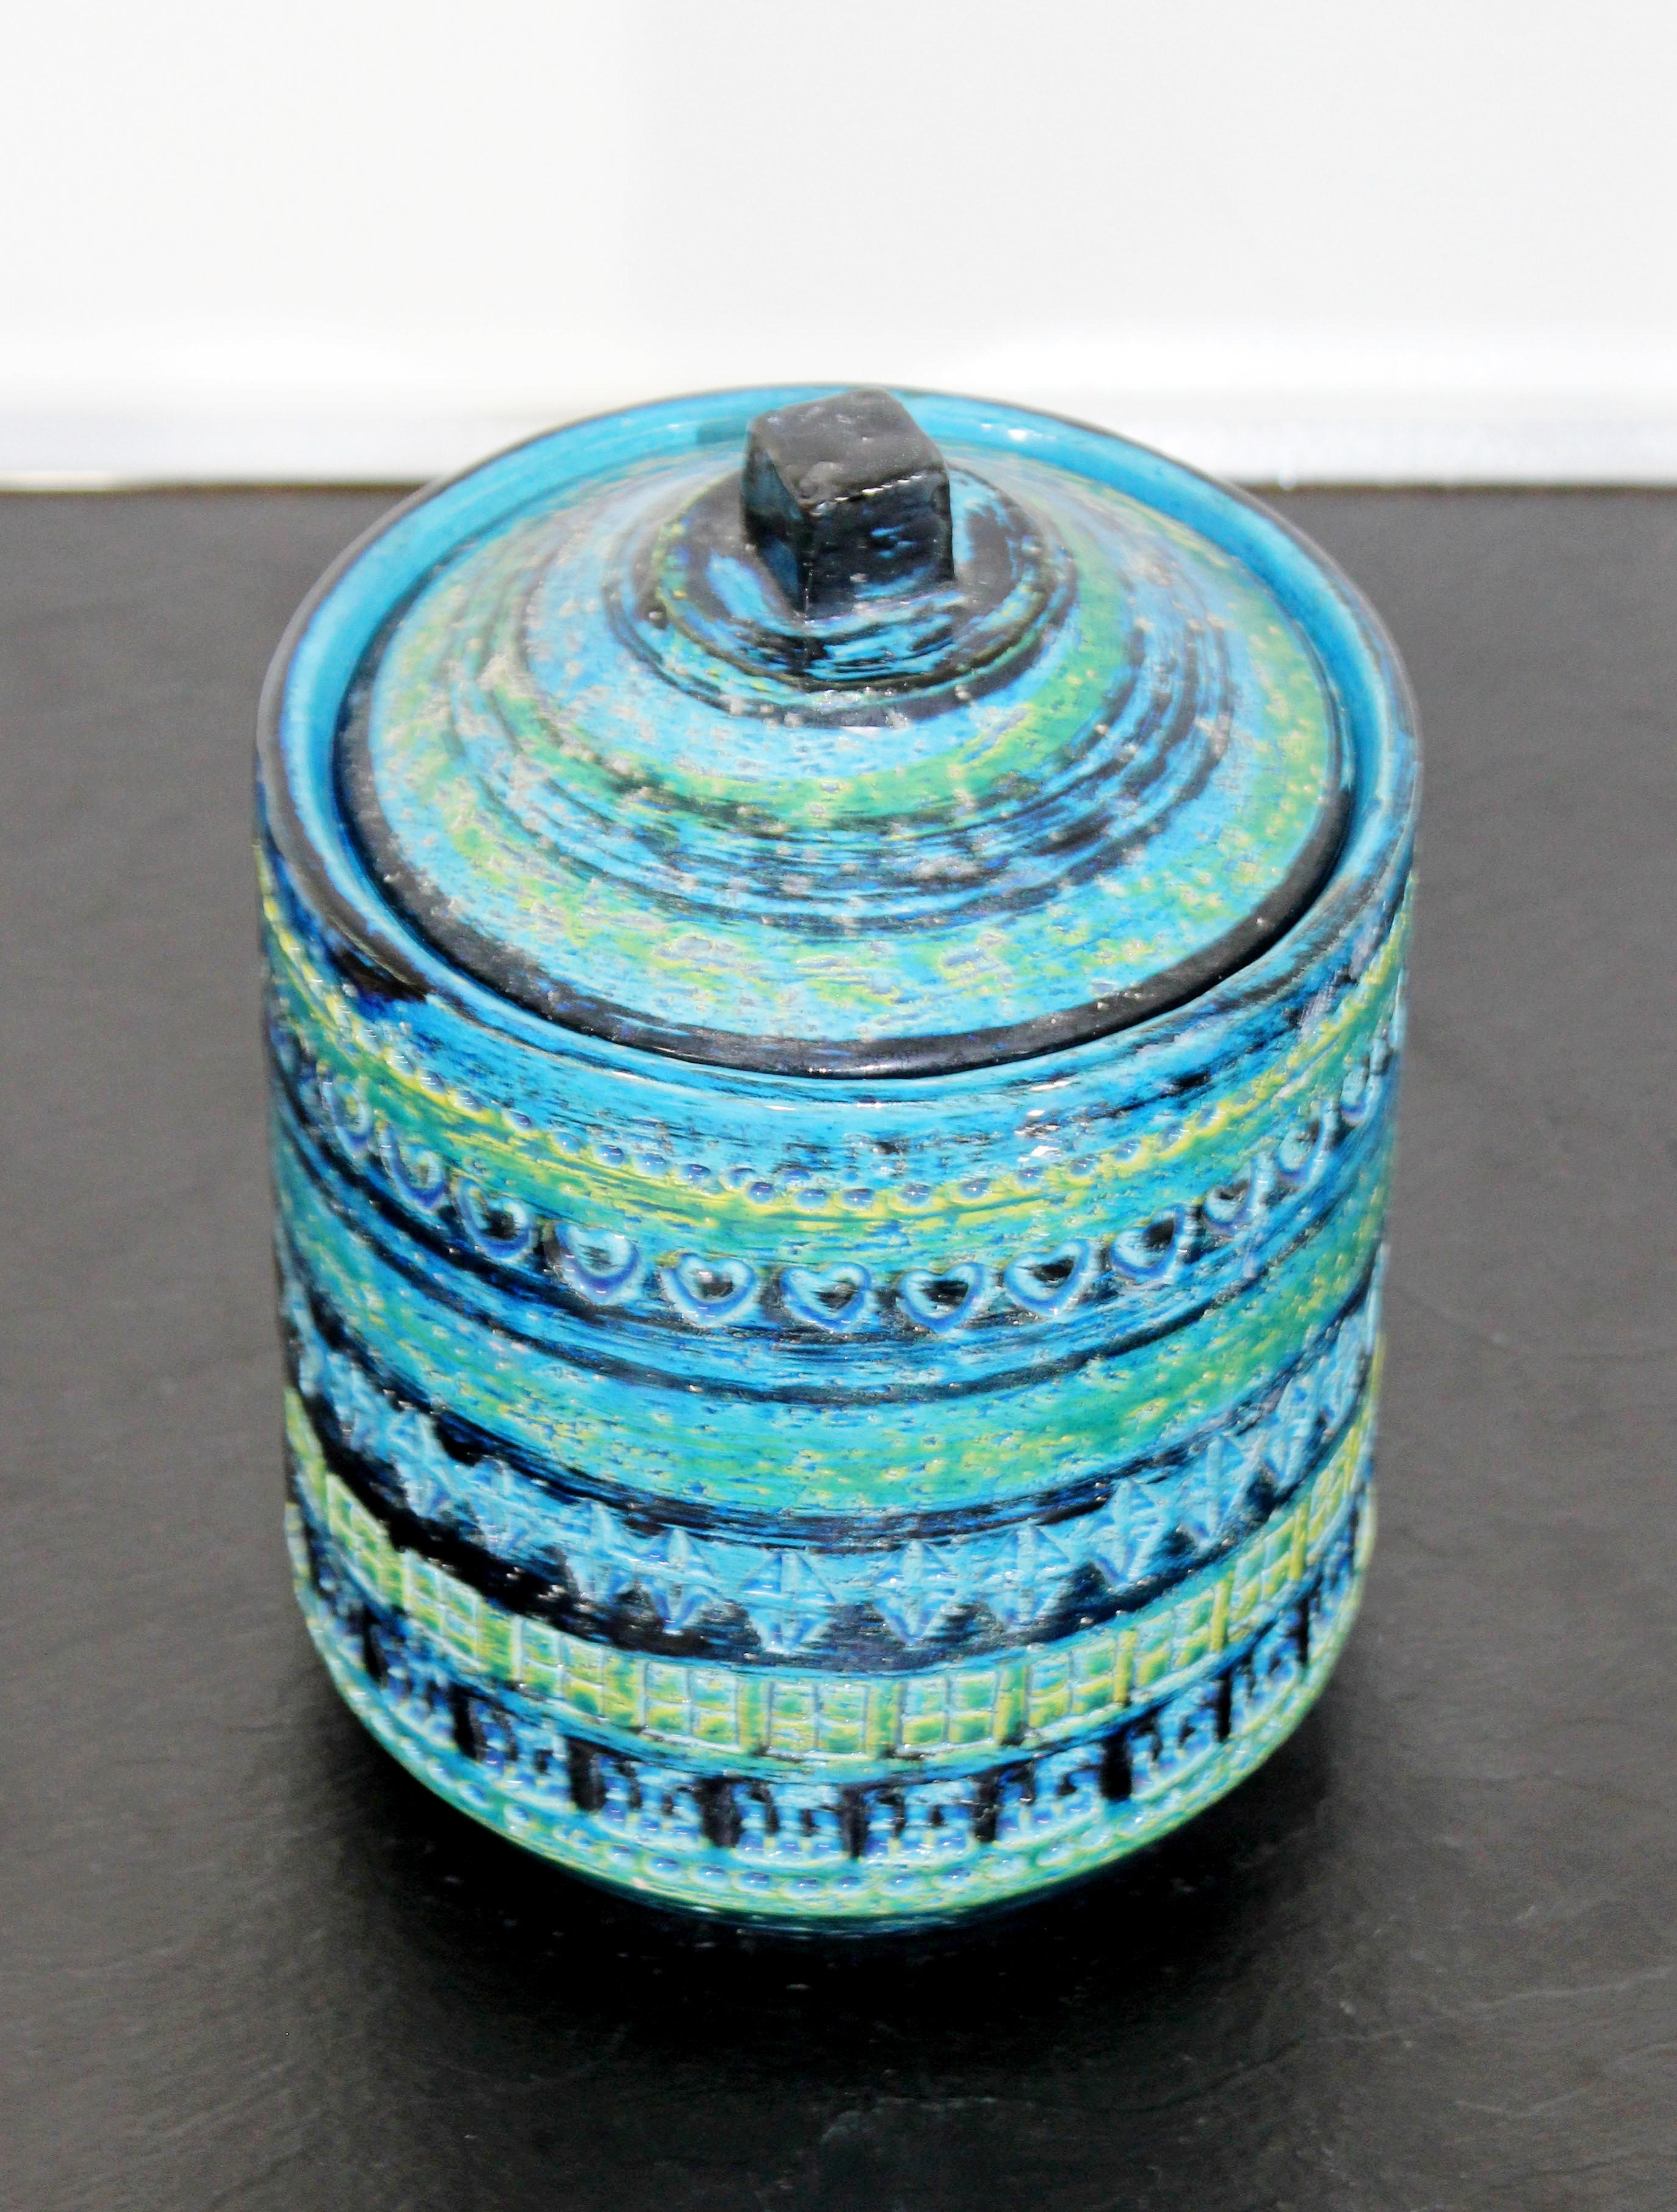 For your consideration is a gorgeous, blue and green, ceramic, lidded vessel, by Bitossi, made in Italy in the 1970s. In excellent condition. The dimensions are 5.5